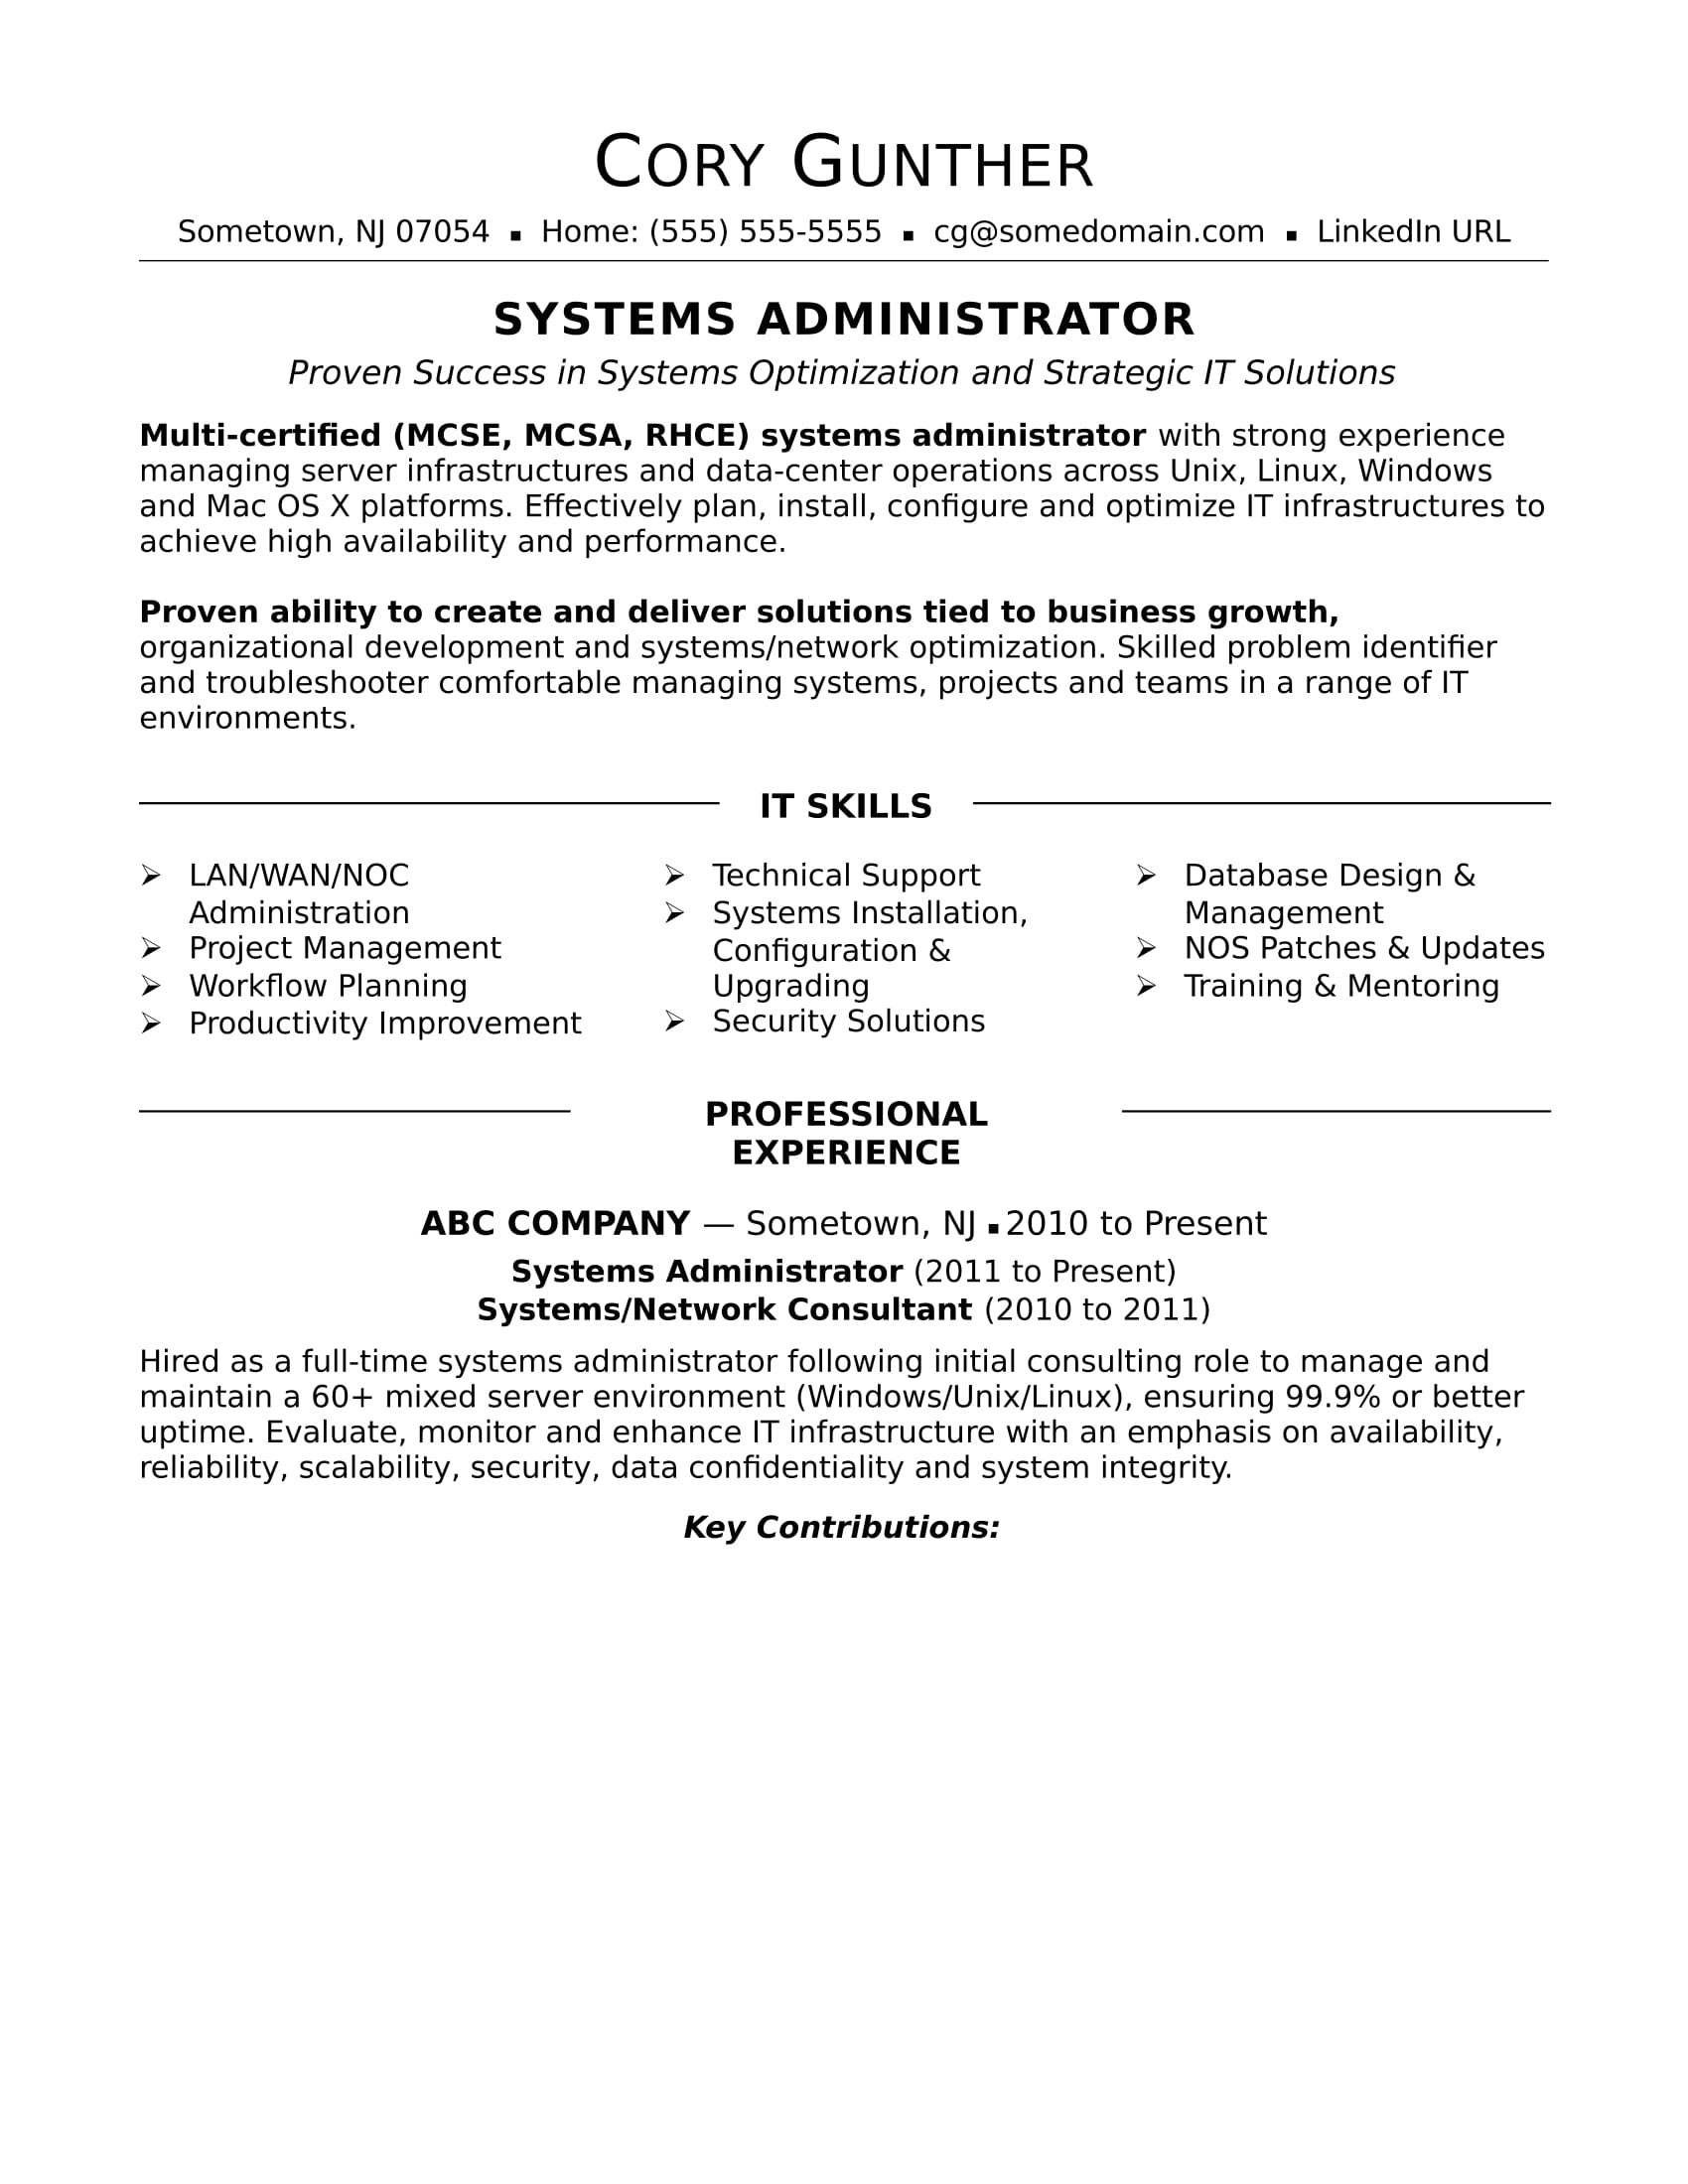 Business Analyst with Aladdin Sample Resume Sample Resume for An Experienced Systems Administrator Monster.com